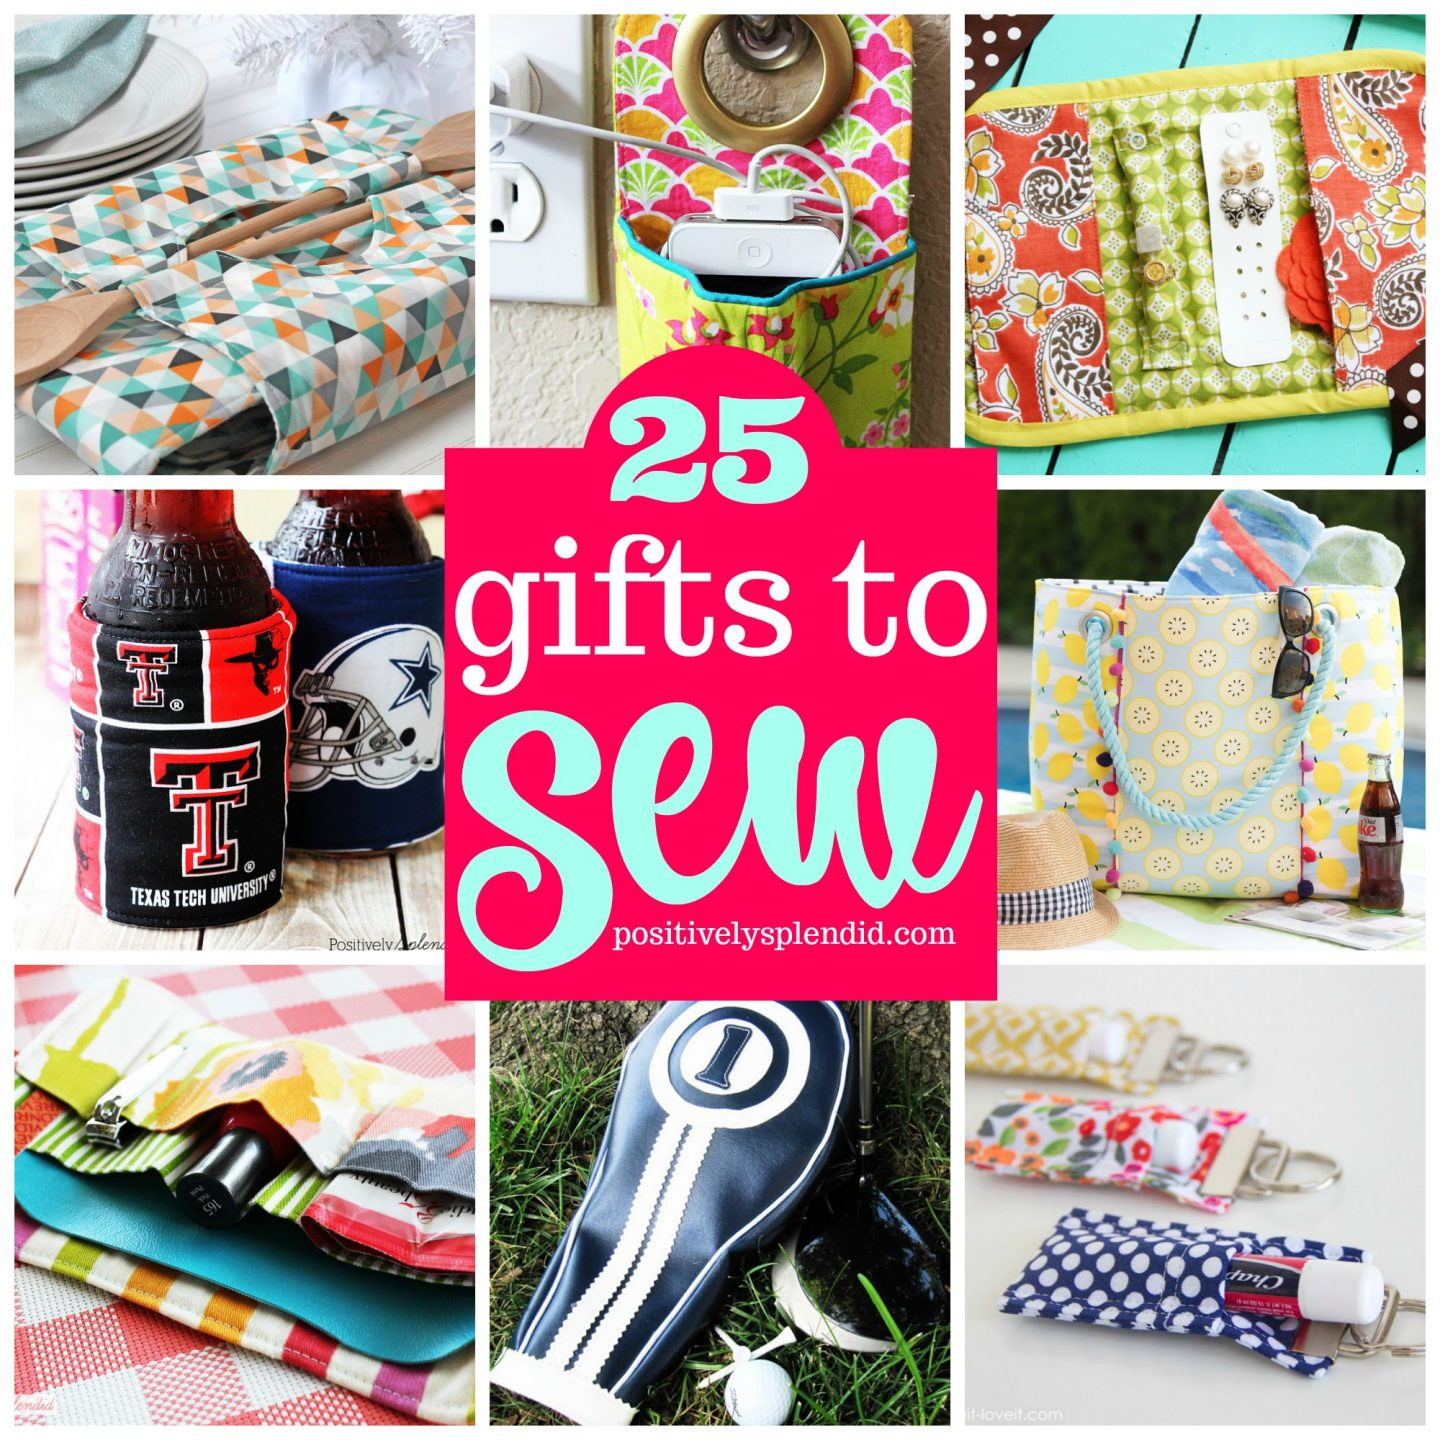 DIY Useful Gifts
 25 Very Best Gifts to Sew Start sewing ts today